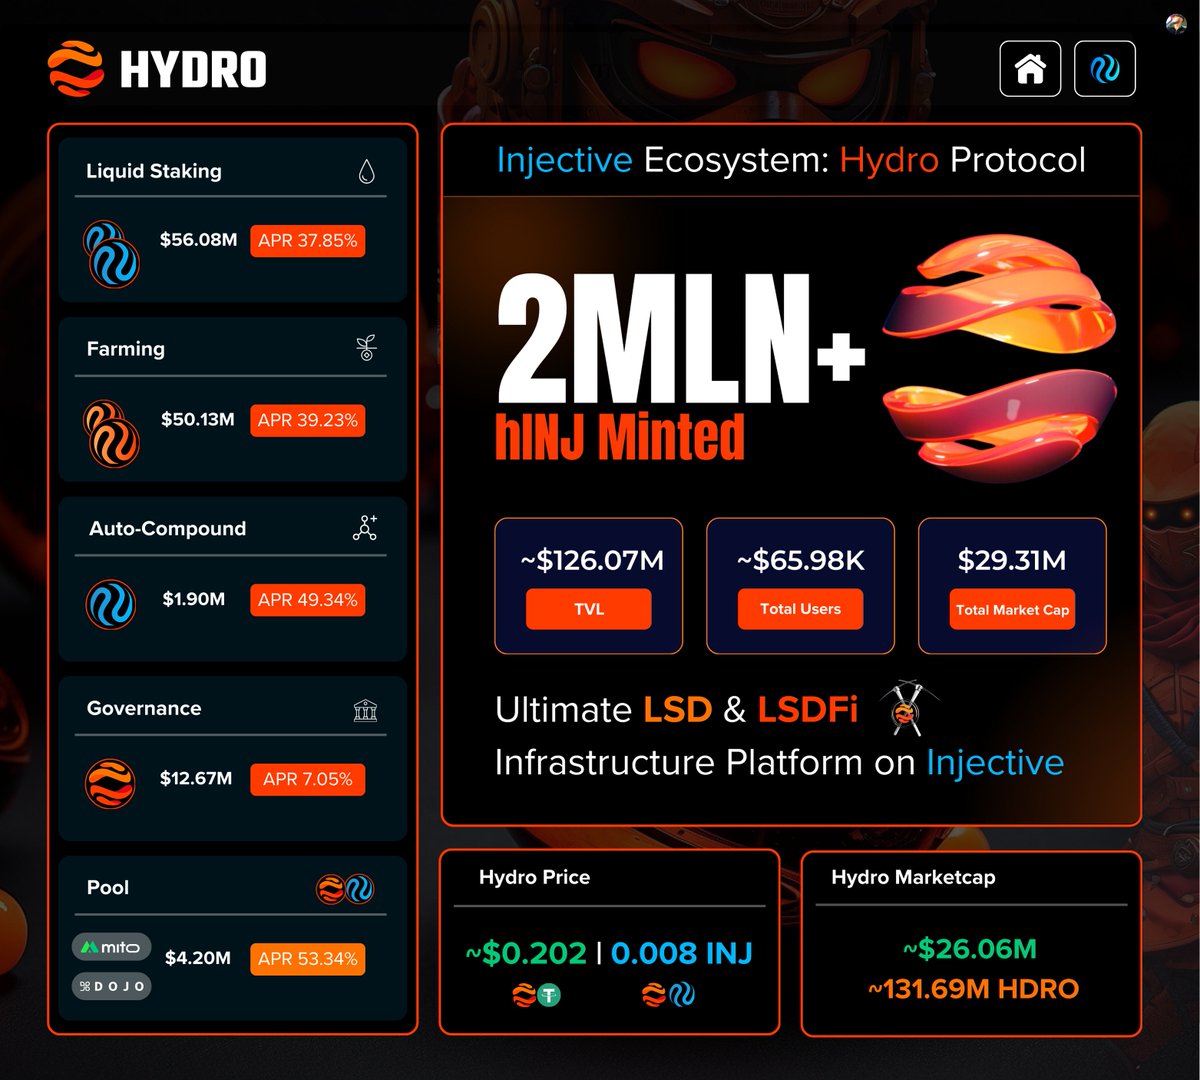 🥏Hydro Protocol Hits Major Milestone! @hydro_fi 2 MLN+ hINJ Minted Hydro Protocol is the ultimate @injective - native LSD + LSDFi Protocol, just minted over 2 million $hINJ. This strengthens hINJ's position as the leading LST on #Injective 🚀 Hydro maximizes yield with LSD,